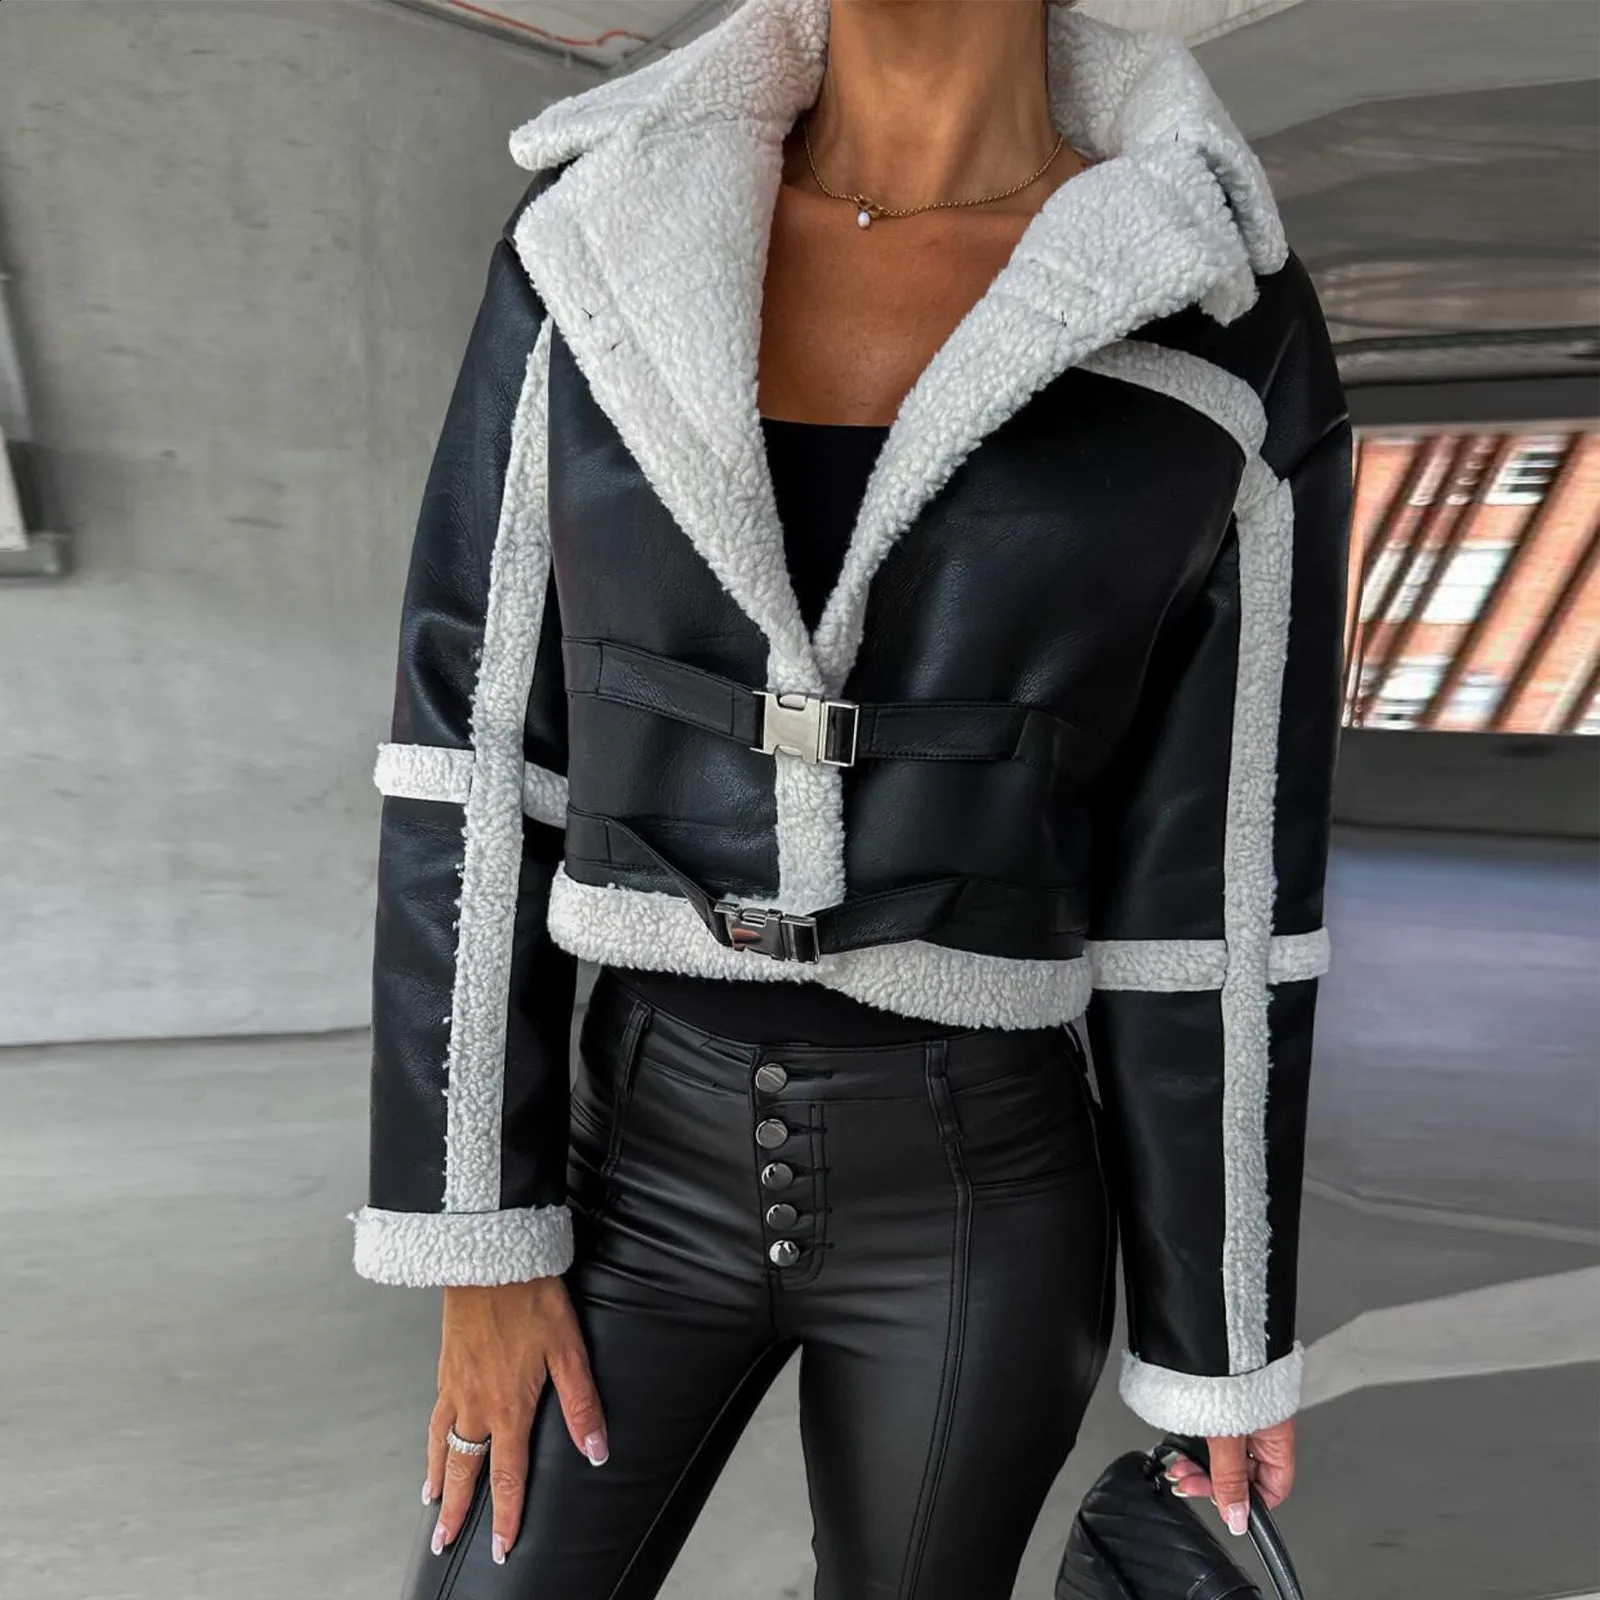 WomenS Casual Fashion Autumn And Winter Integrated Long Sleeved Jacket Woman'S Button Cropped Jacket Mujer Black Lapel Bomber 240202